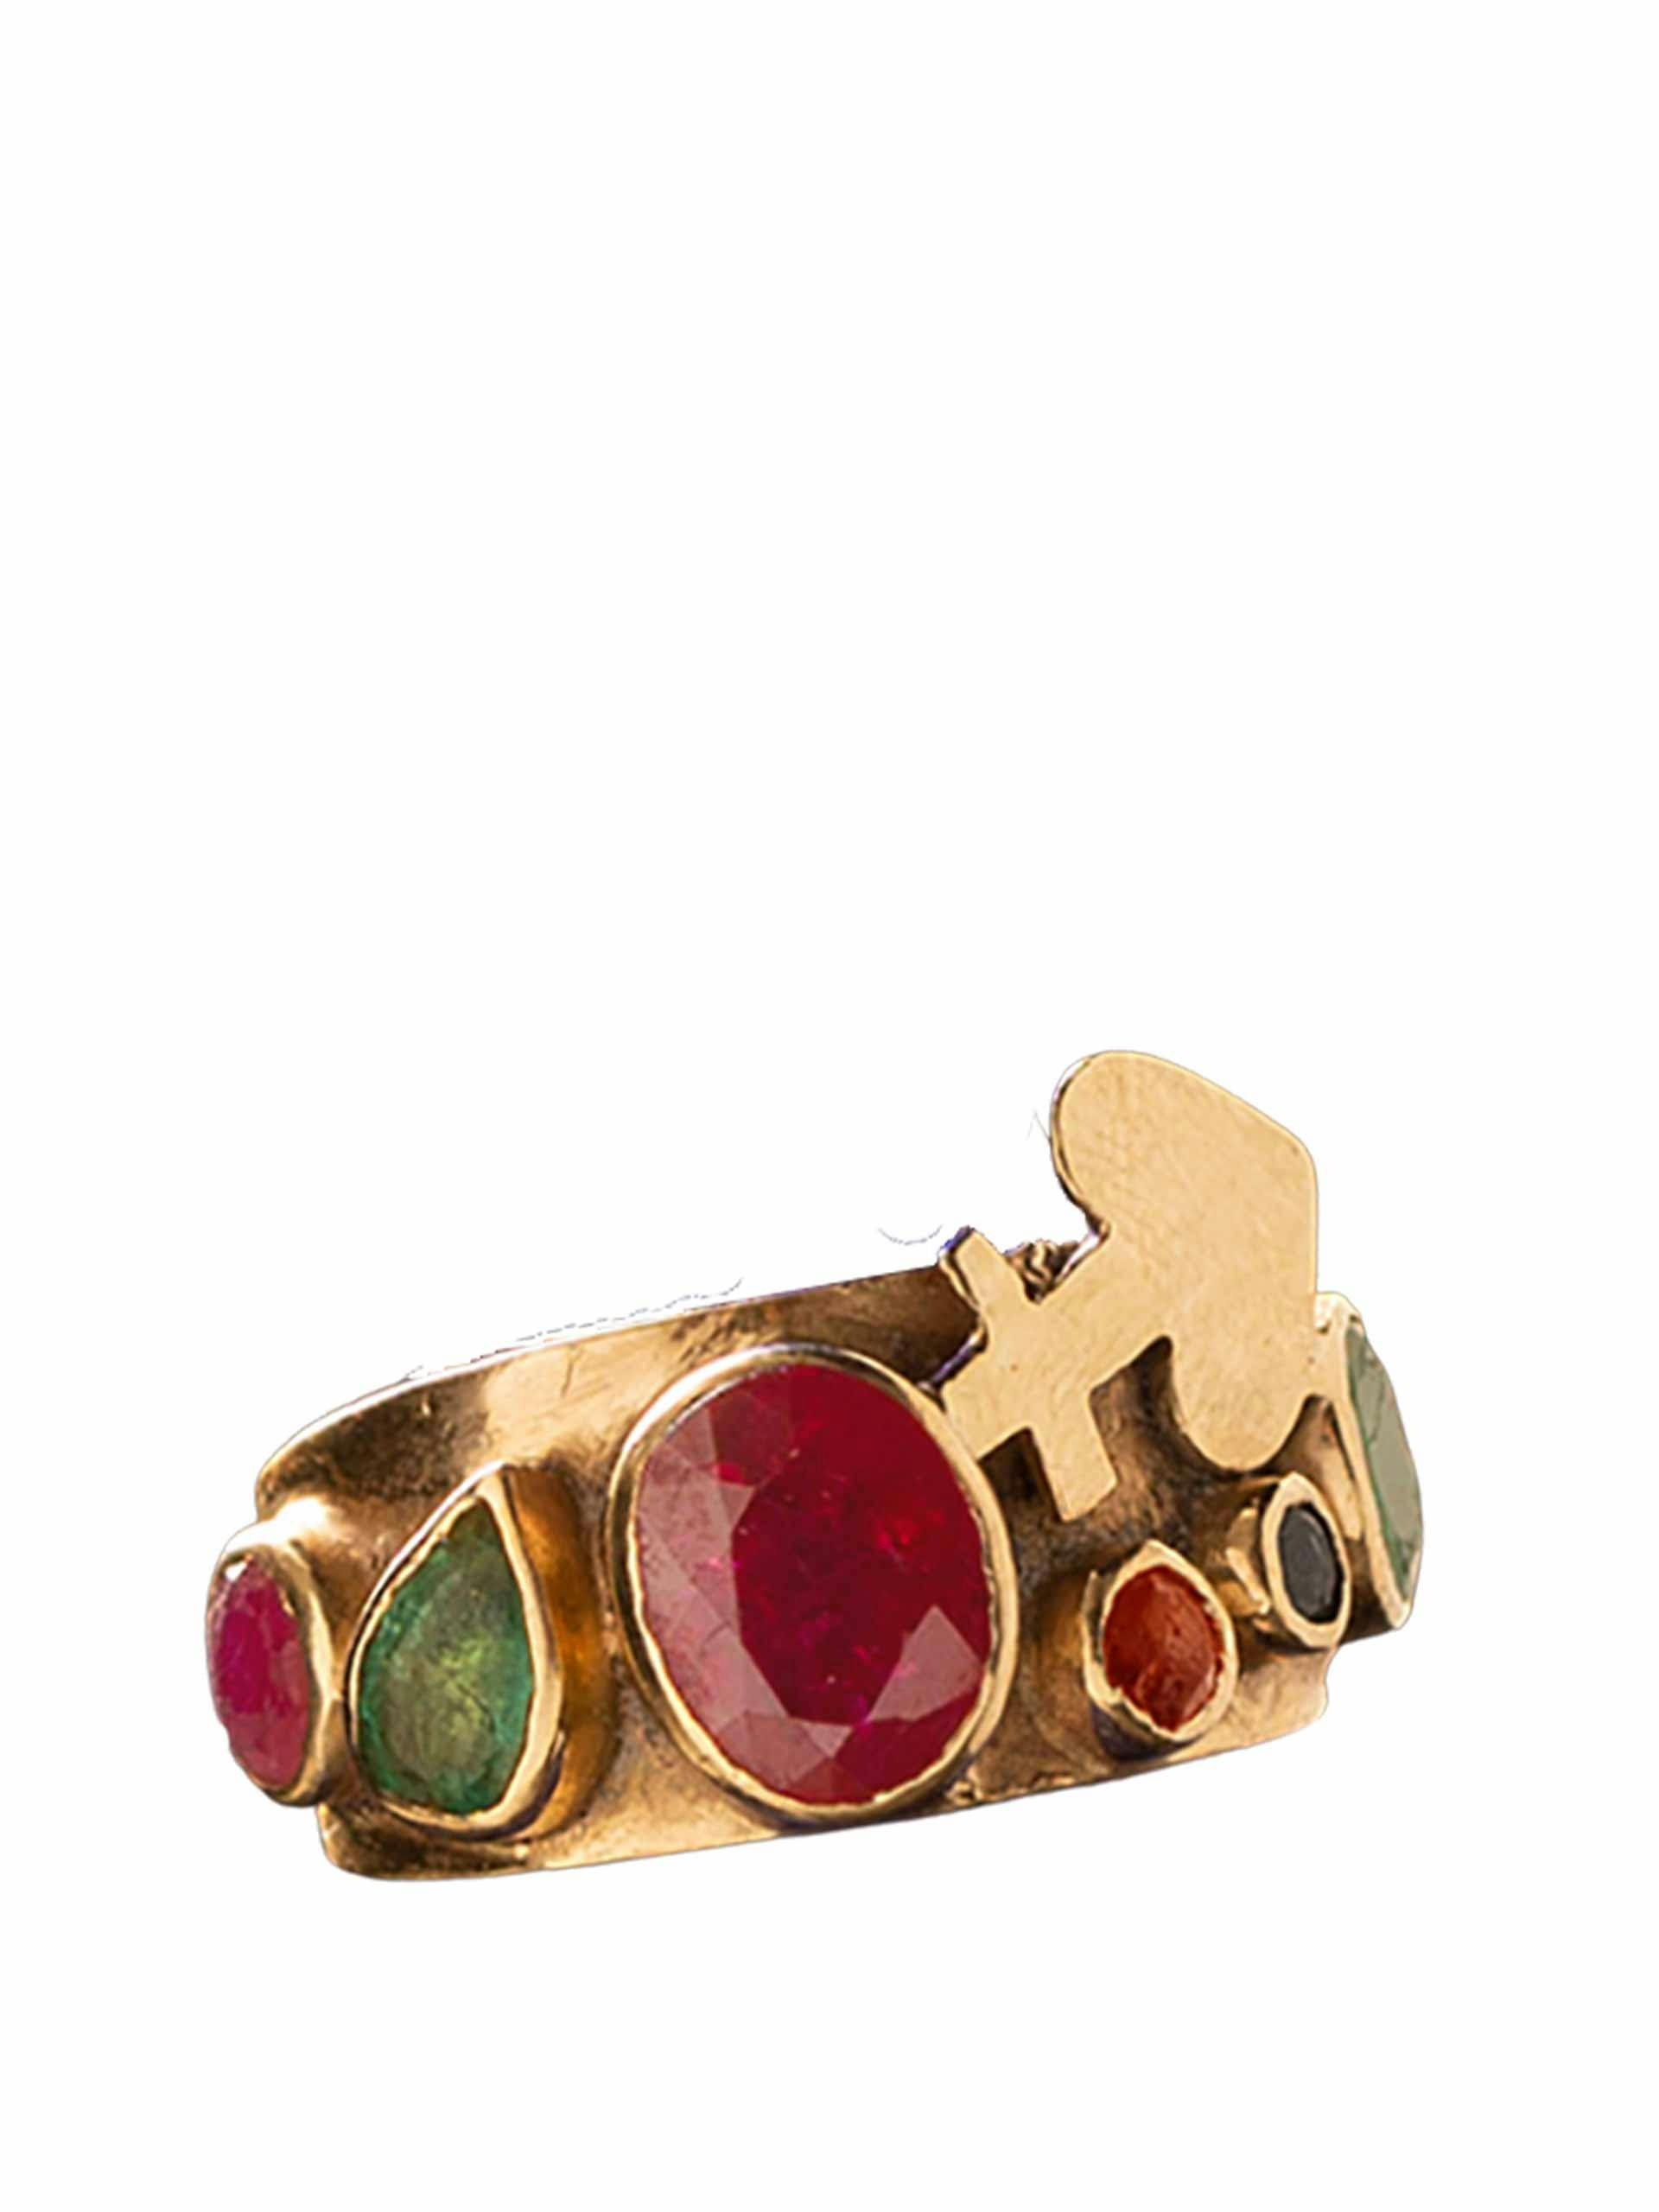 18kt gold ring with gemstones